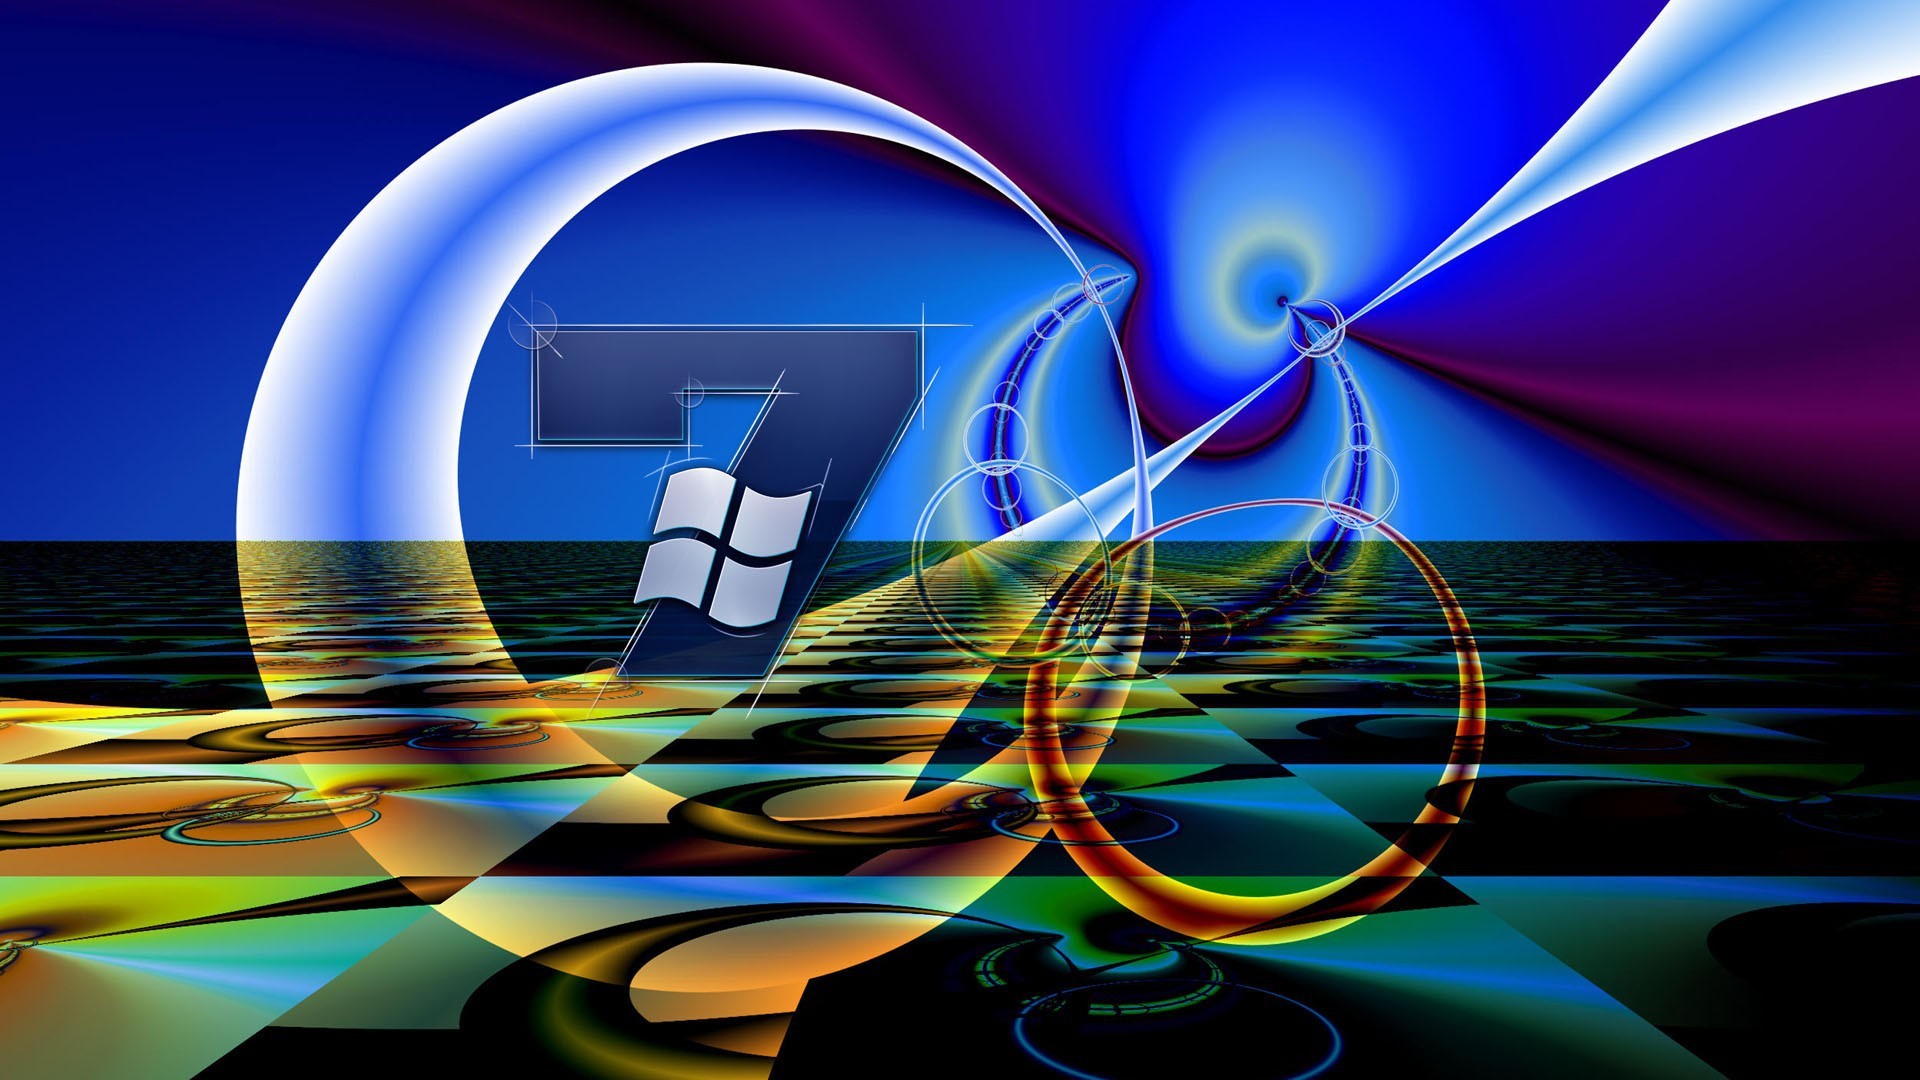 1920x1080 Windows 7 - Photo Wallpapers, Pictures For Windows 7